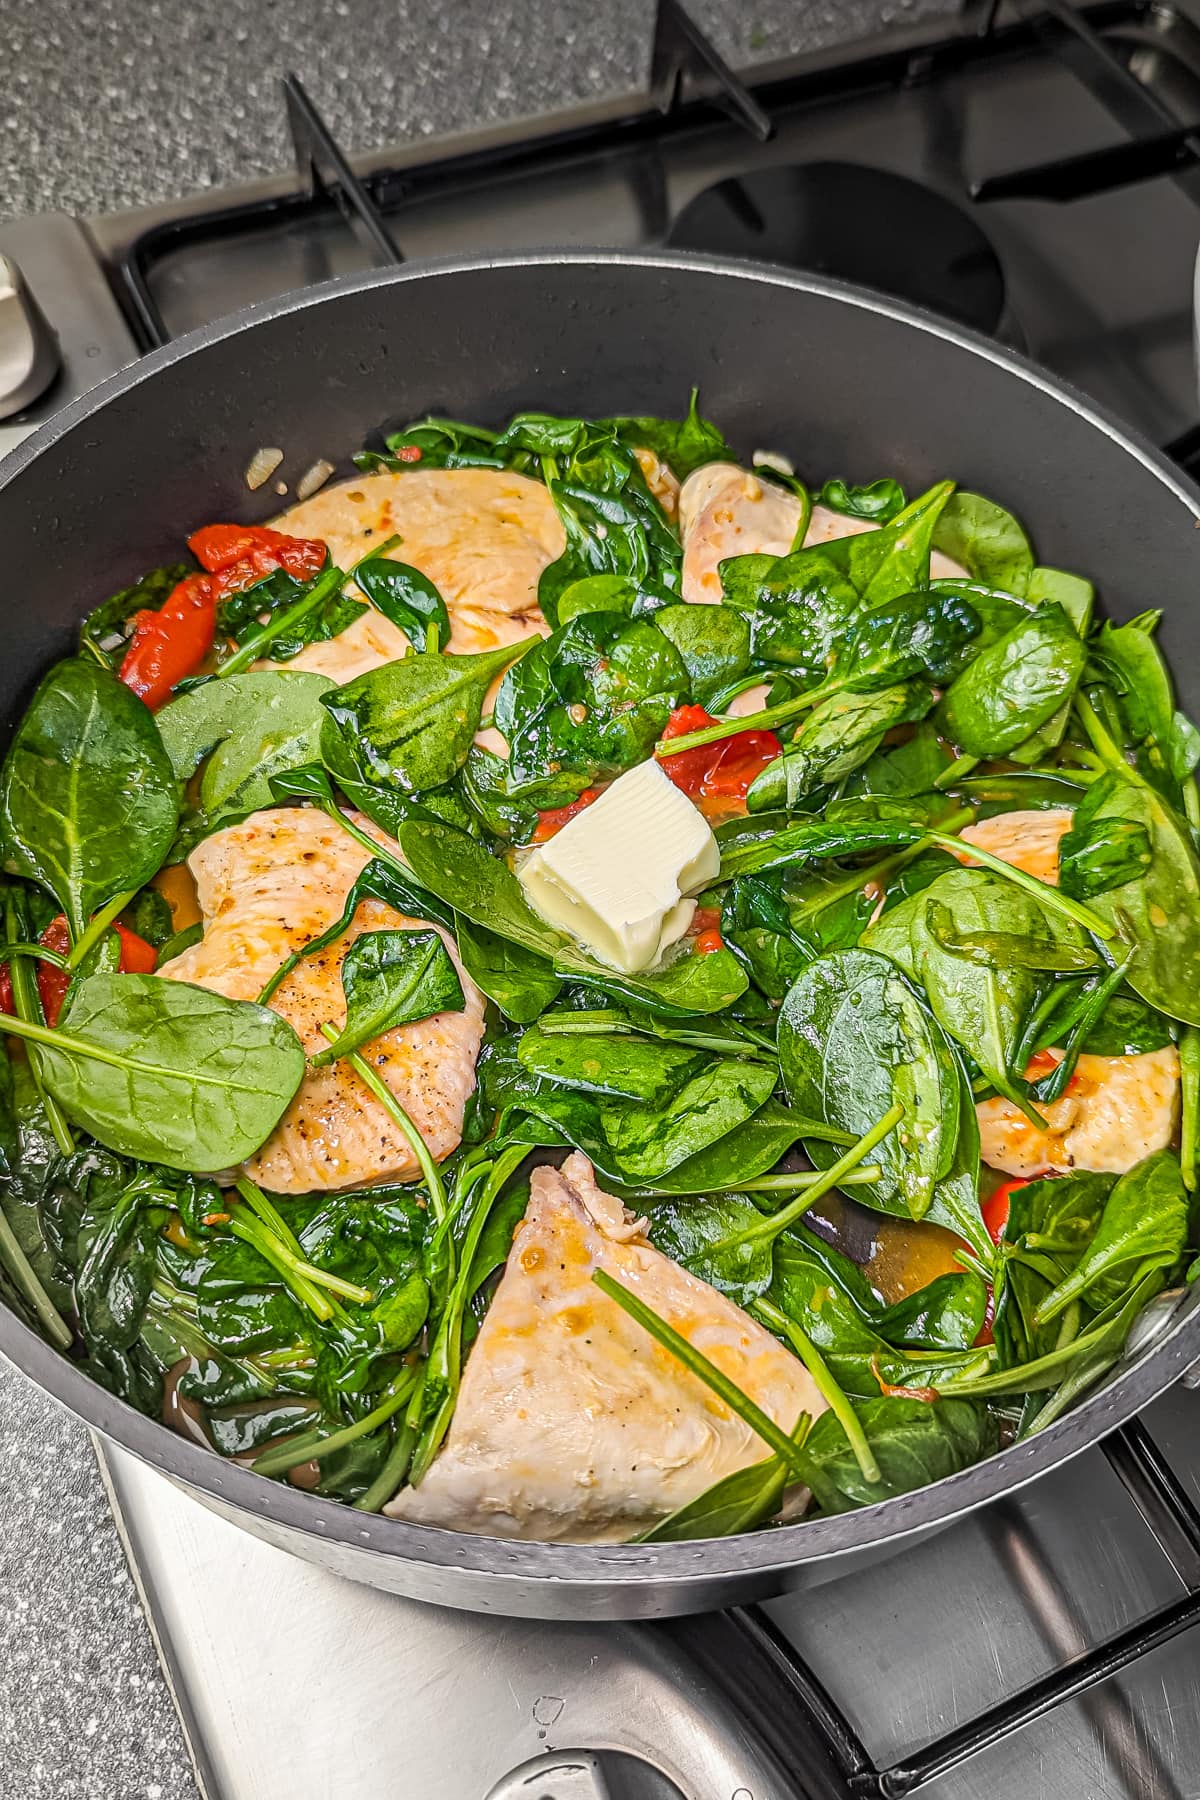 Butter melting into the skillet with chicken, tomatoes, and spinach.